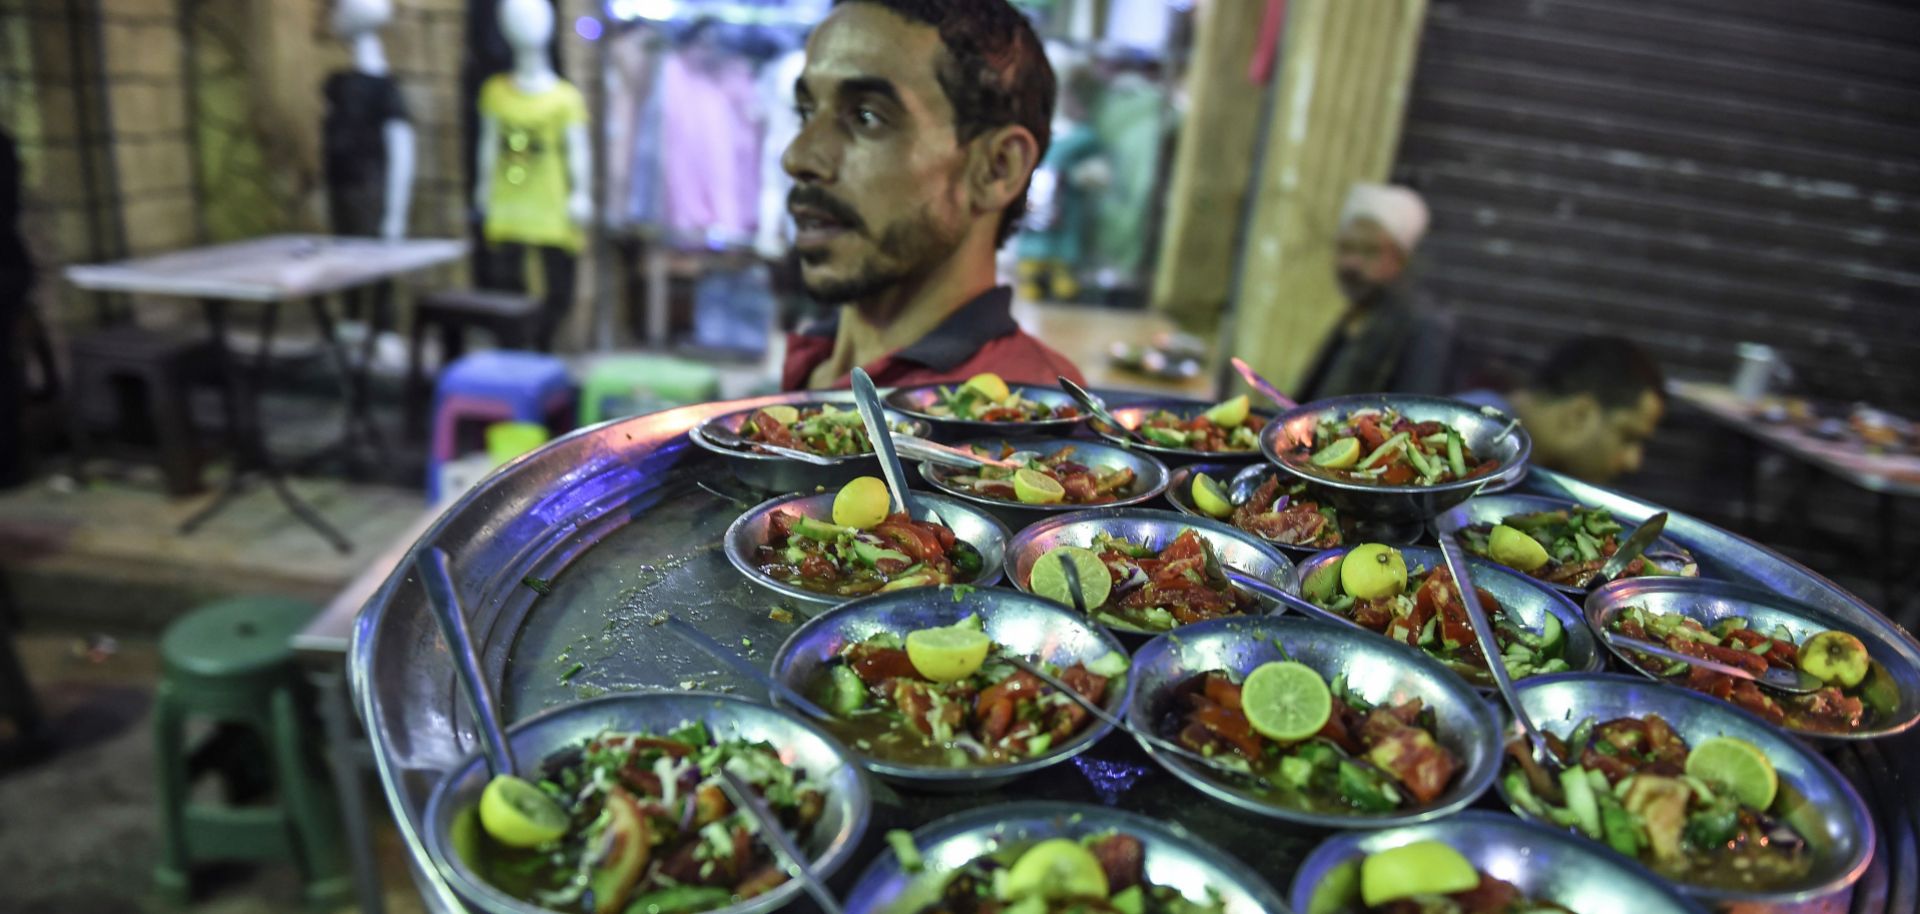 A 'suhur' meal, which is served before dawn during the holy month of Ramadan, in Cairo on May 31, 2018.